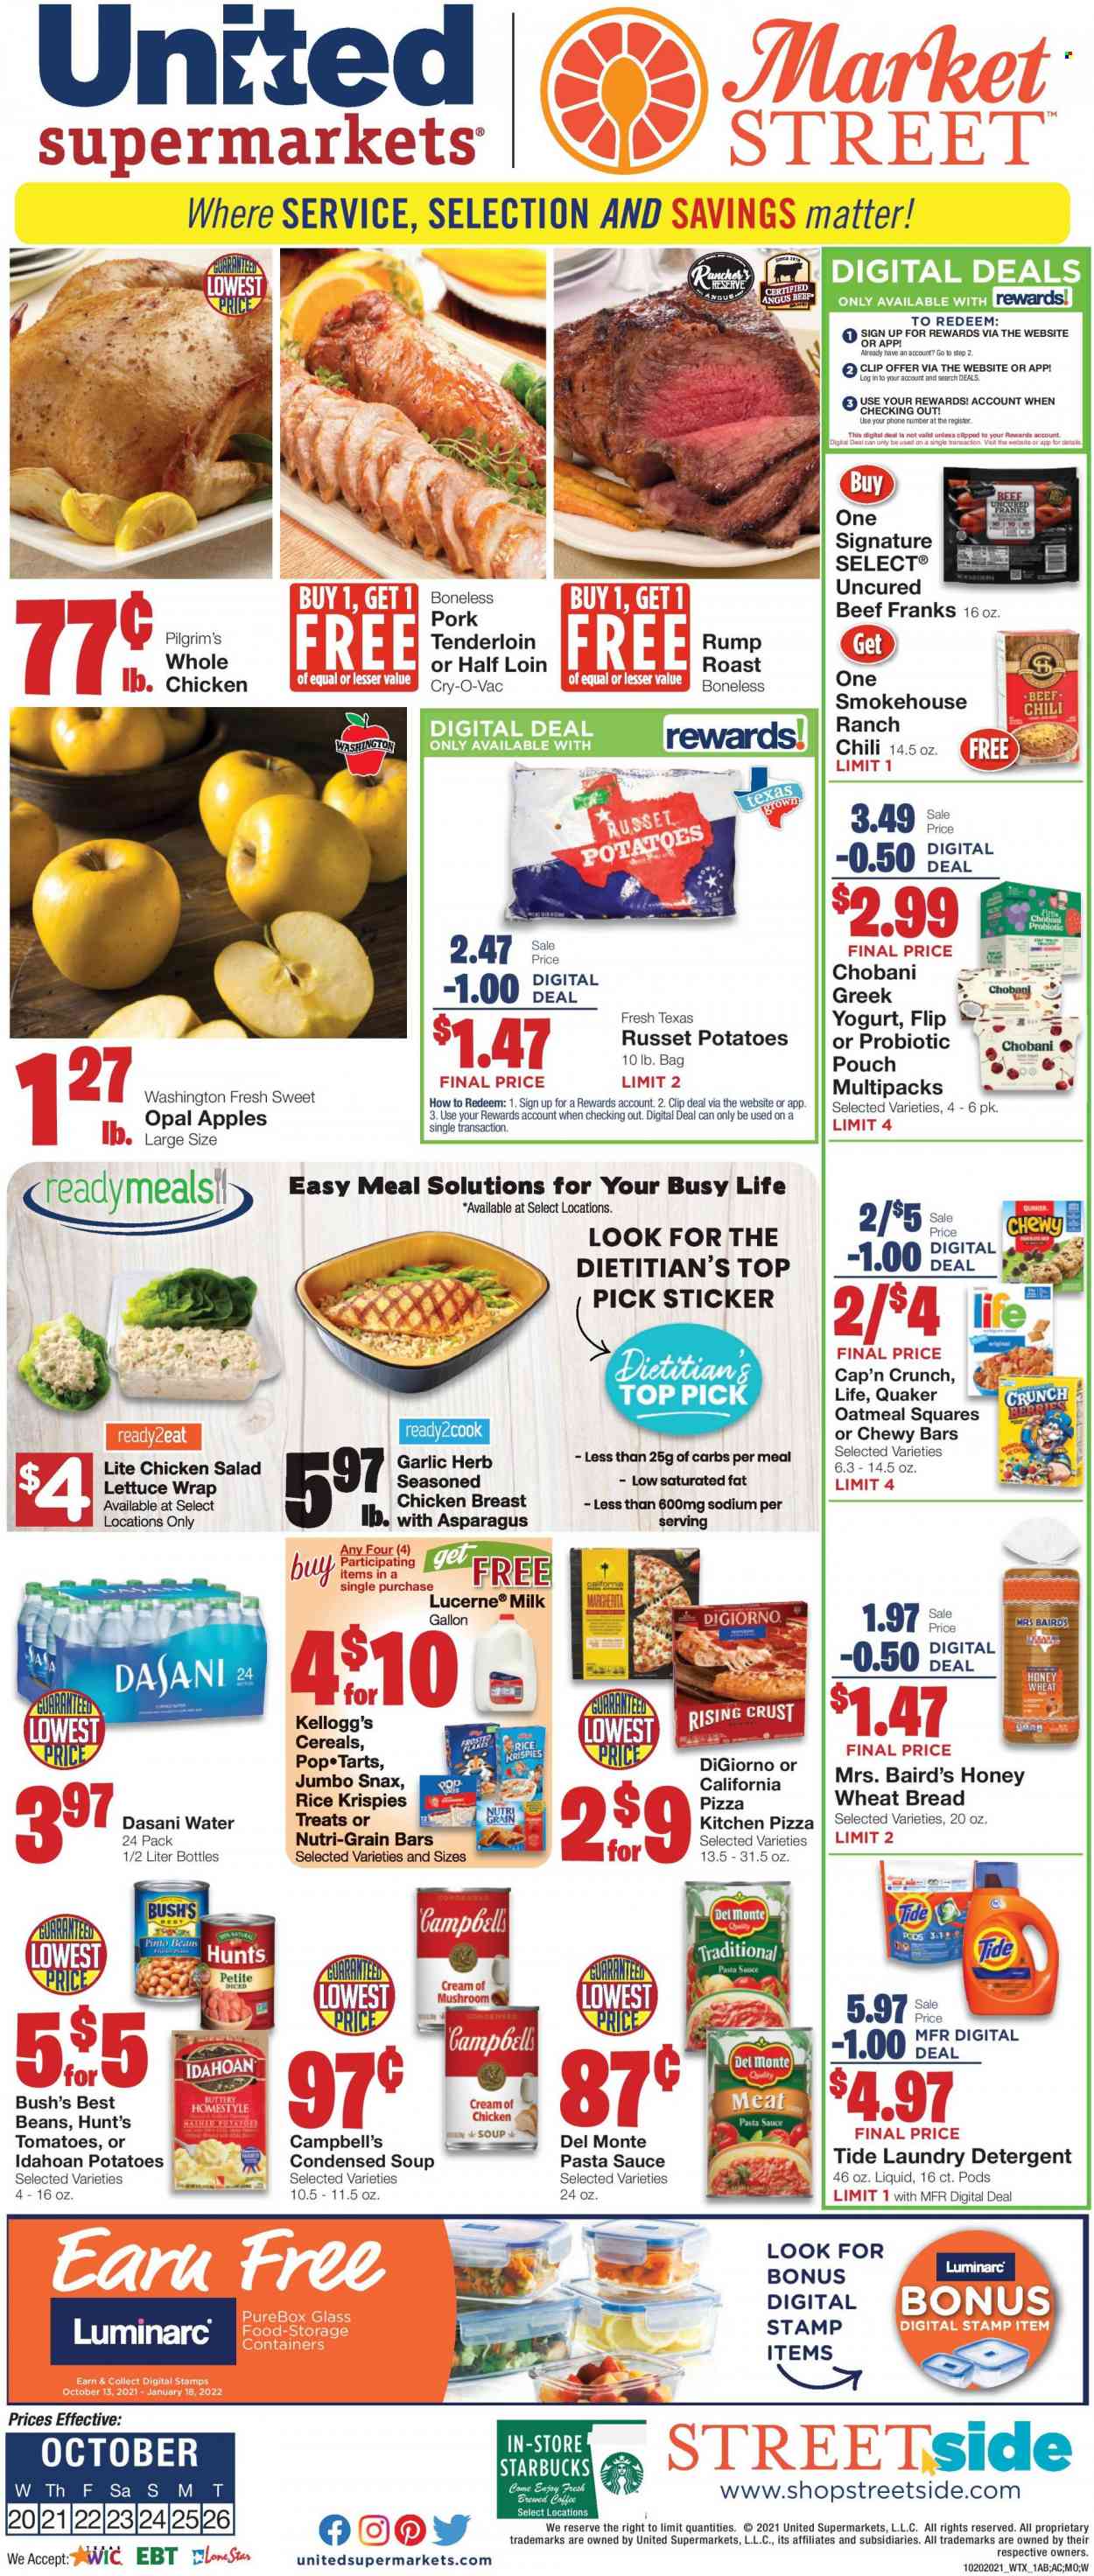 thumbnail - United Supermarkets Flyer - 10/20/2021 - 10/26/2021 - Sales products - wheat bread, asparagus, russet potatoes, lettuce, apples, chicken breasts, beef meat, pork meat, pork tenderloin, Campbell's, mashed potatoes, pizza, pasta sauce, condensed soup, soup, sauce, Quaker, instant soup, chicken salad, yoghurt, Chobani, milk, Kellogg's, oatmeal, pinto beans, cereals, Rice Krispies, Cap'n Crunch, Frosted Flakes, Nutri-Grain, coffee, Starbucks, detergent, Tide, laundry detergent, sticker, pin. Page 1.